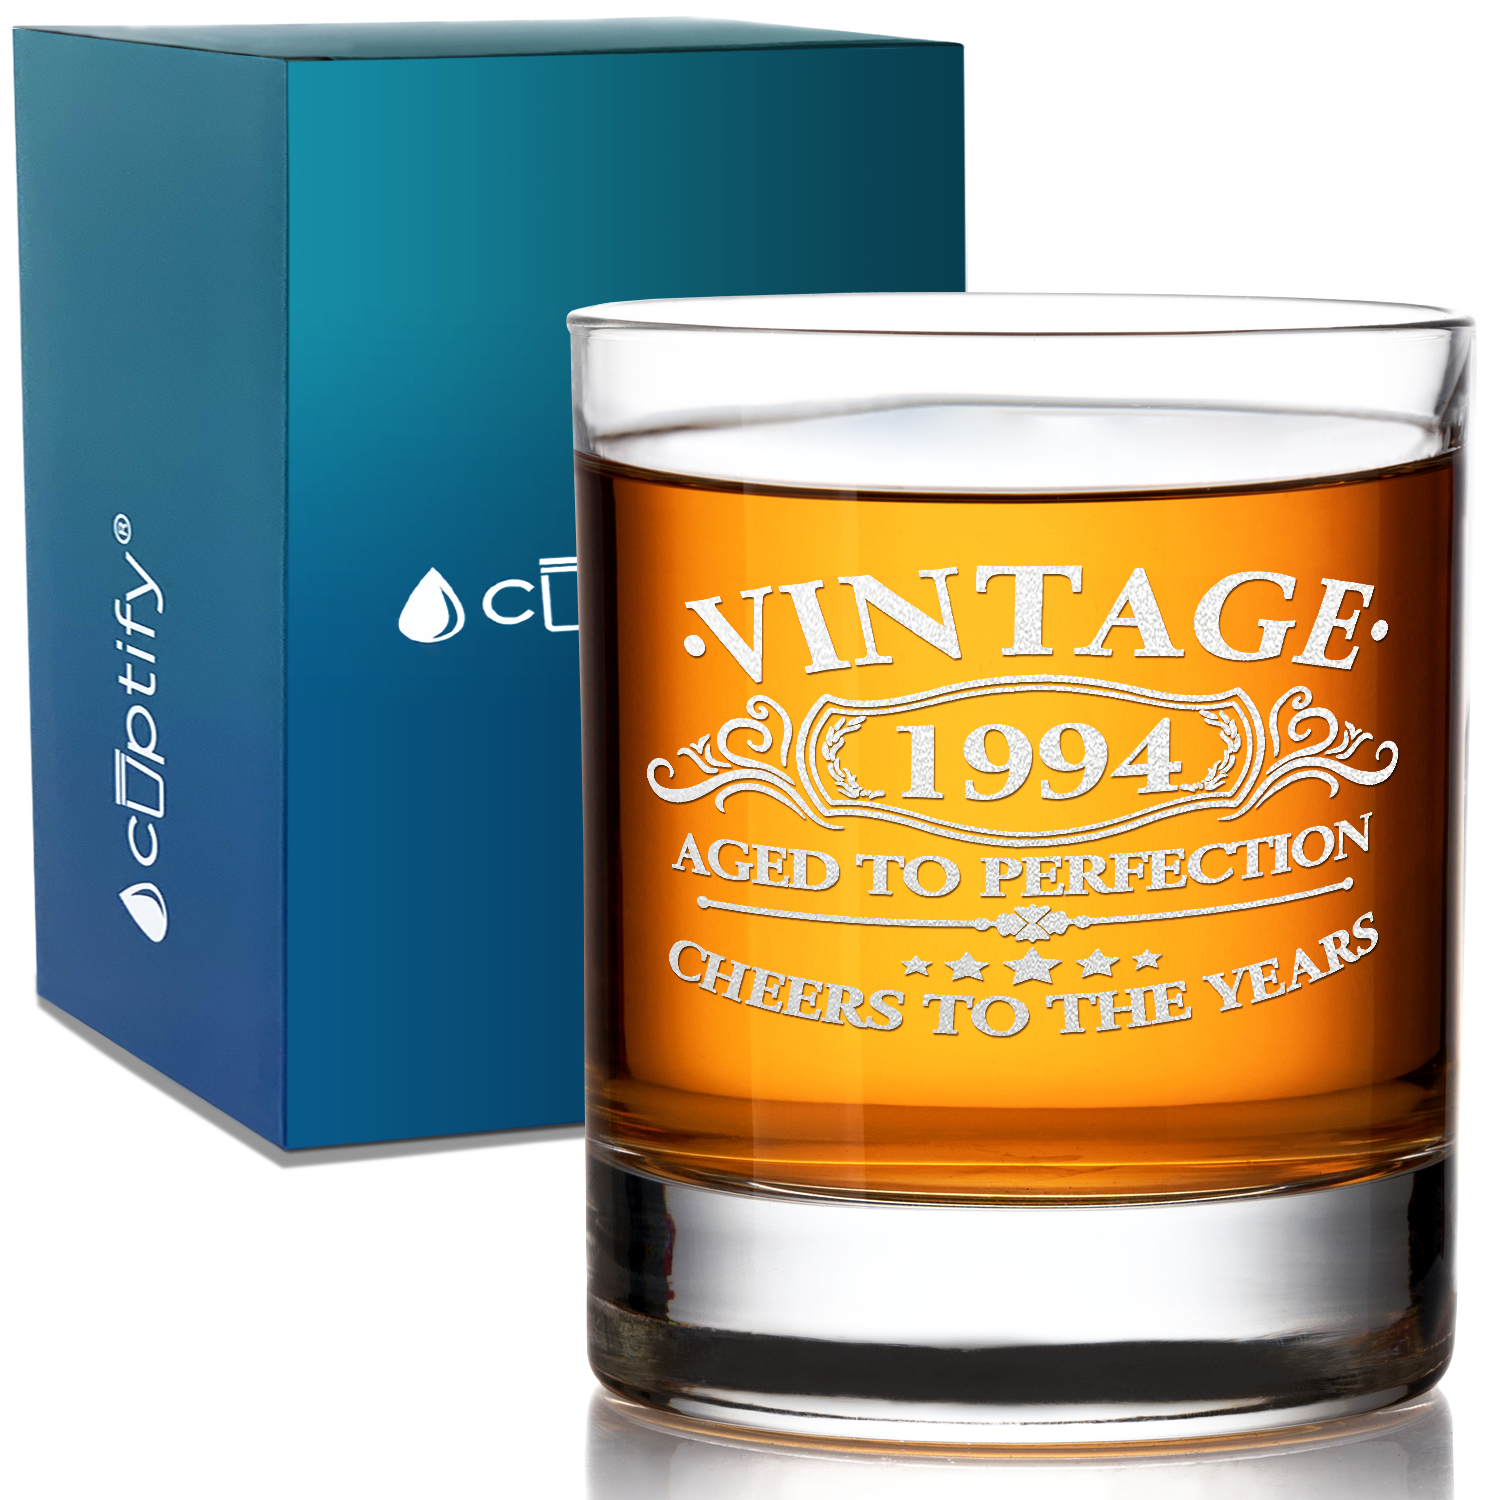 Vintage Aged To Perfection Cheers To 27 Years 1994 Laser Engraved on 10.25oz Old Fashion Glass